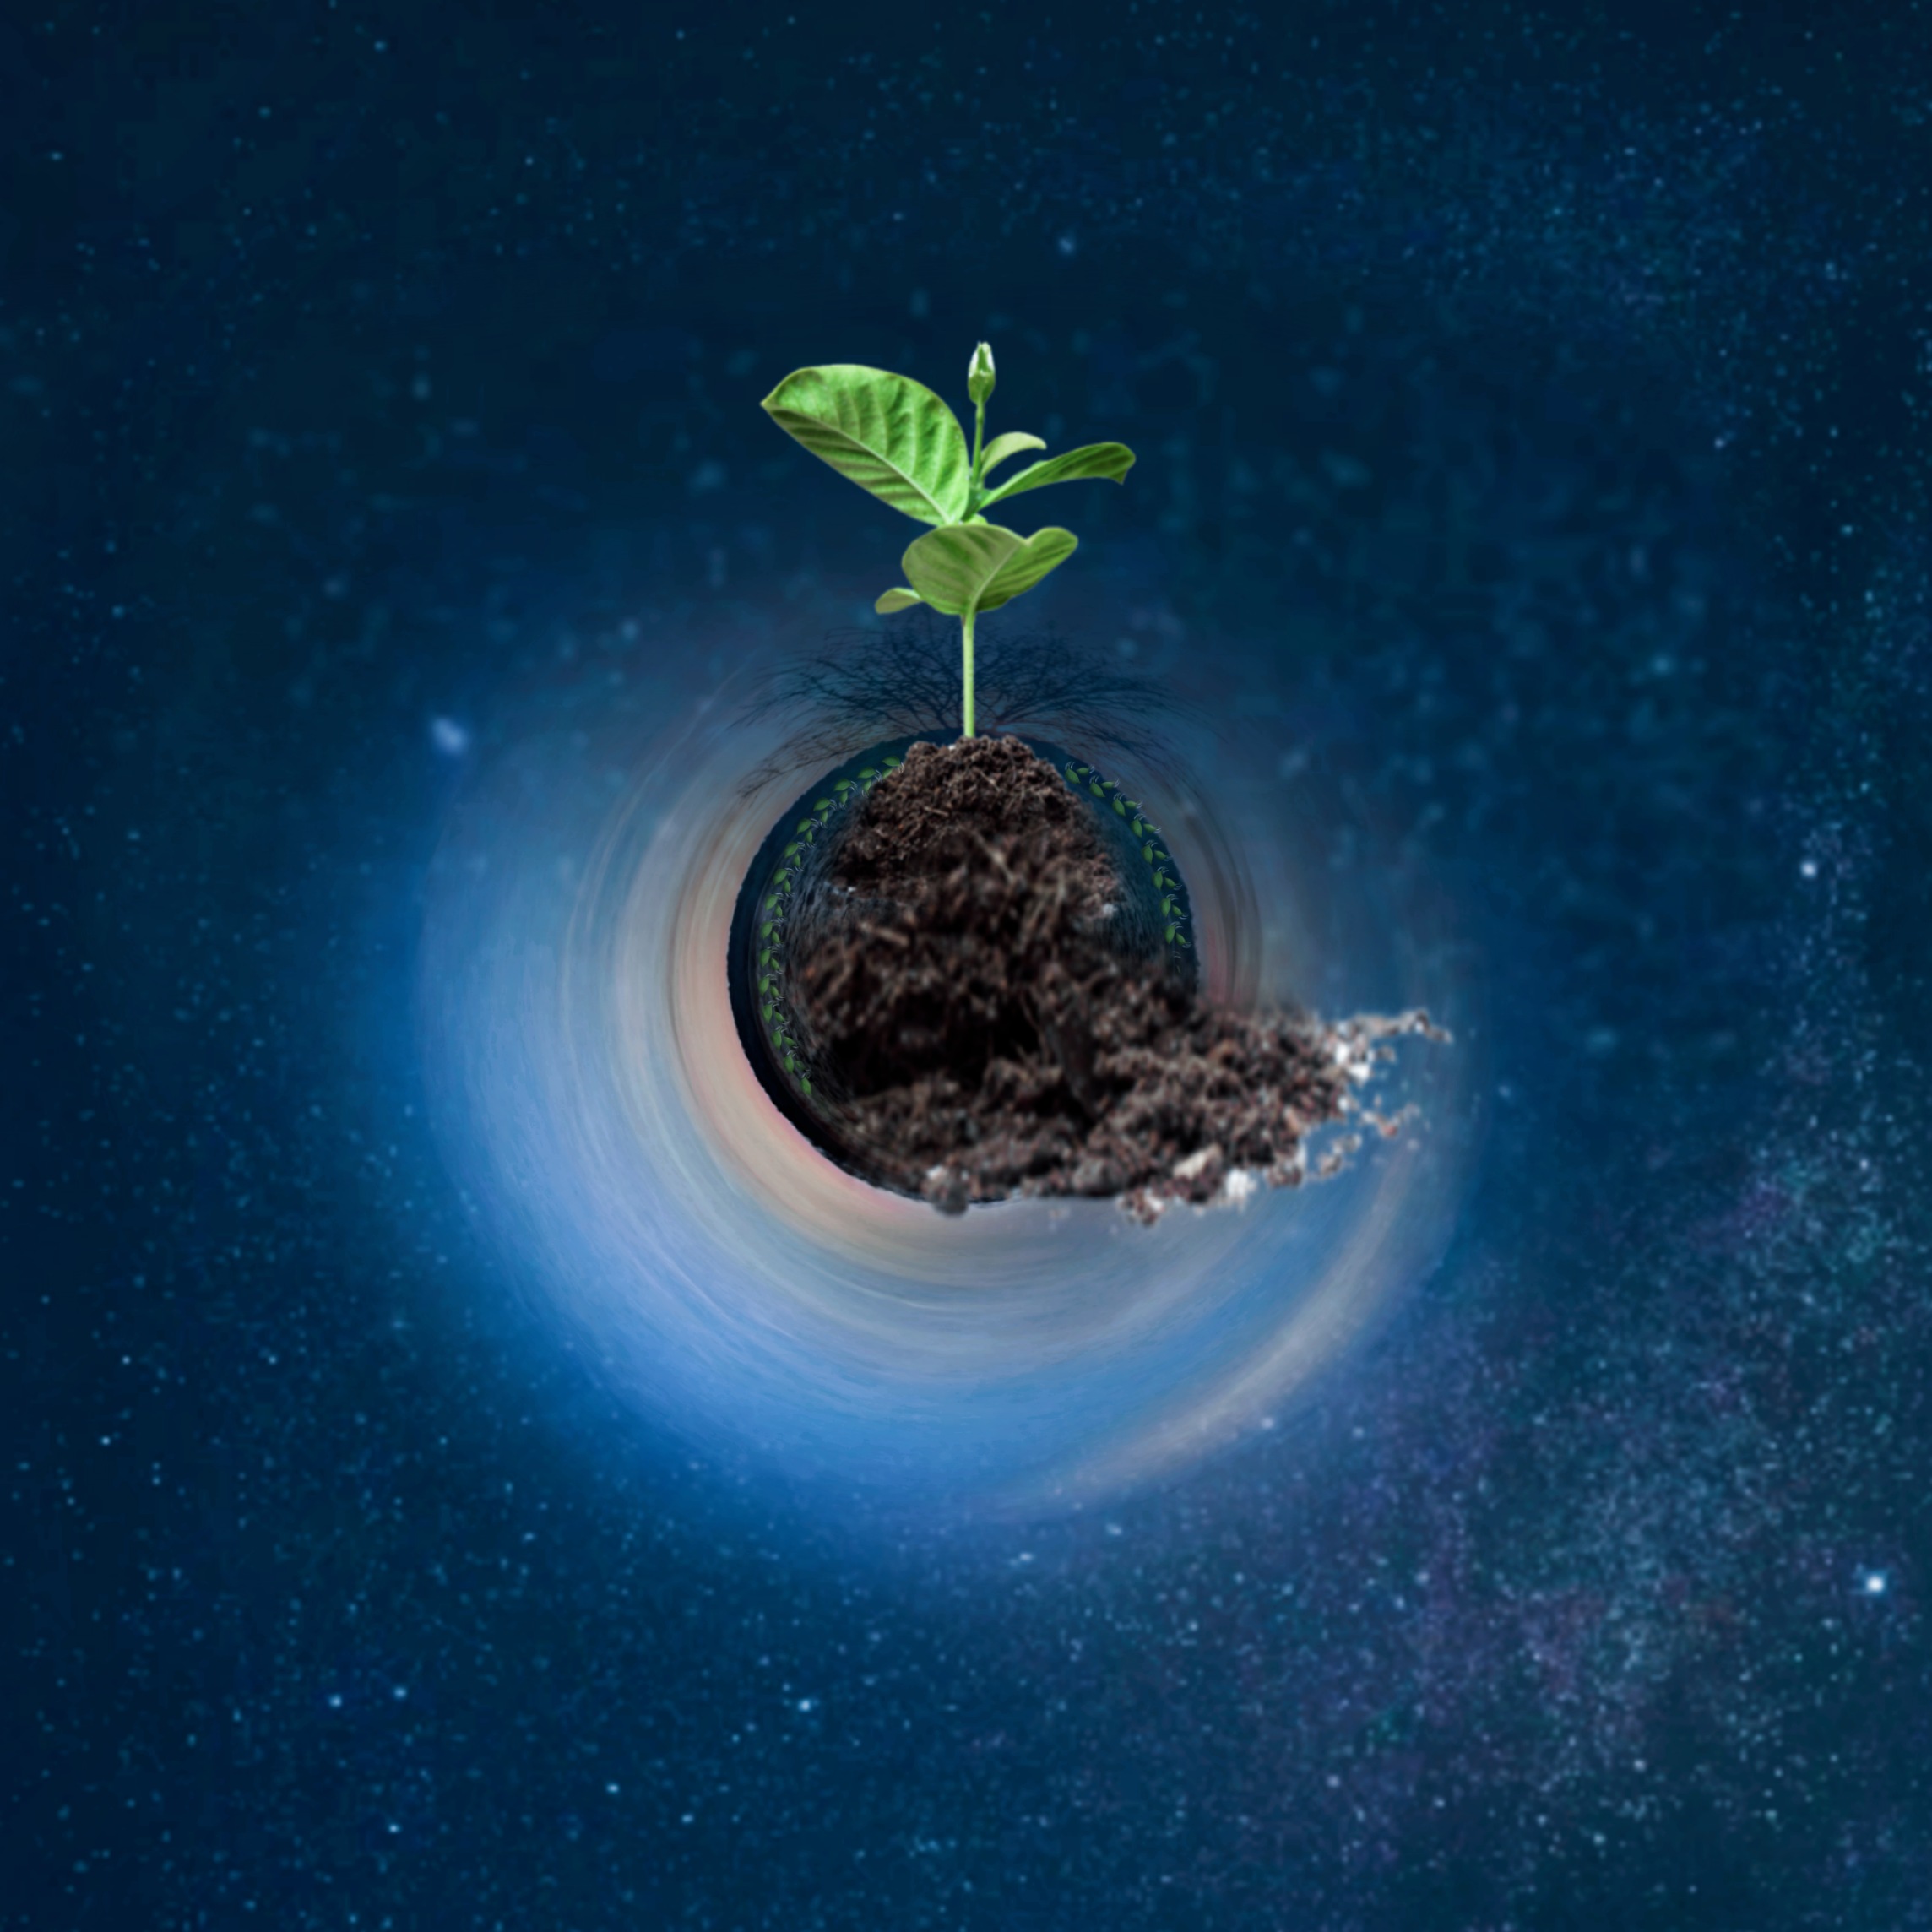 #environmentday #earth #world #space #plant #dirt #emotions#madewithpicsart #howto > tinyplanet > universe overlay> plant sticker> icy3 filter